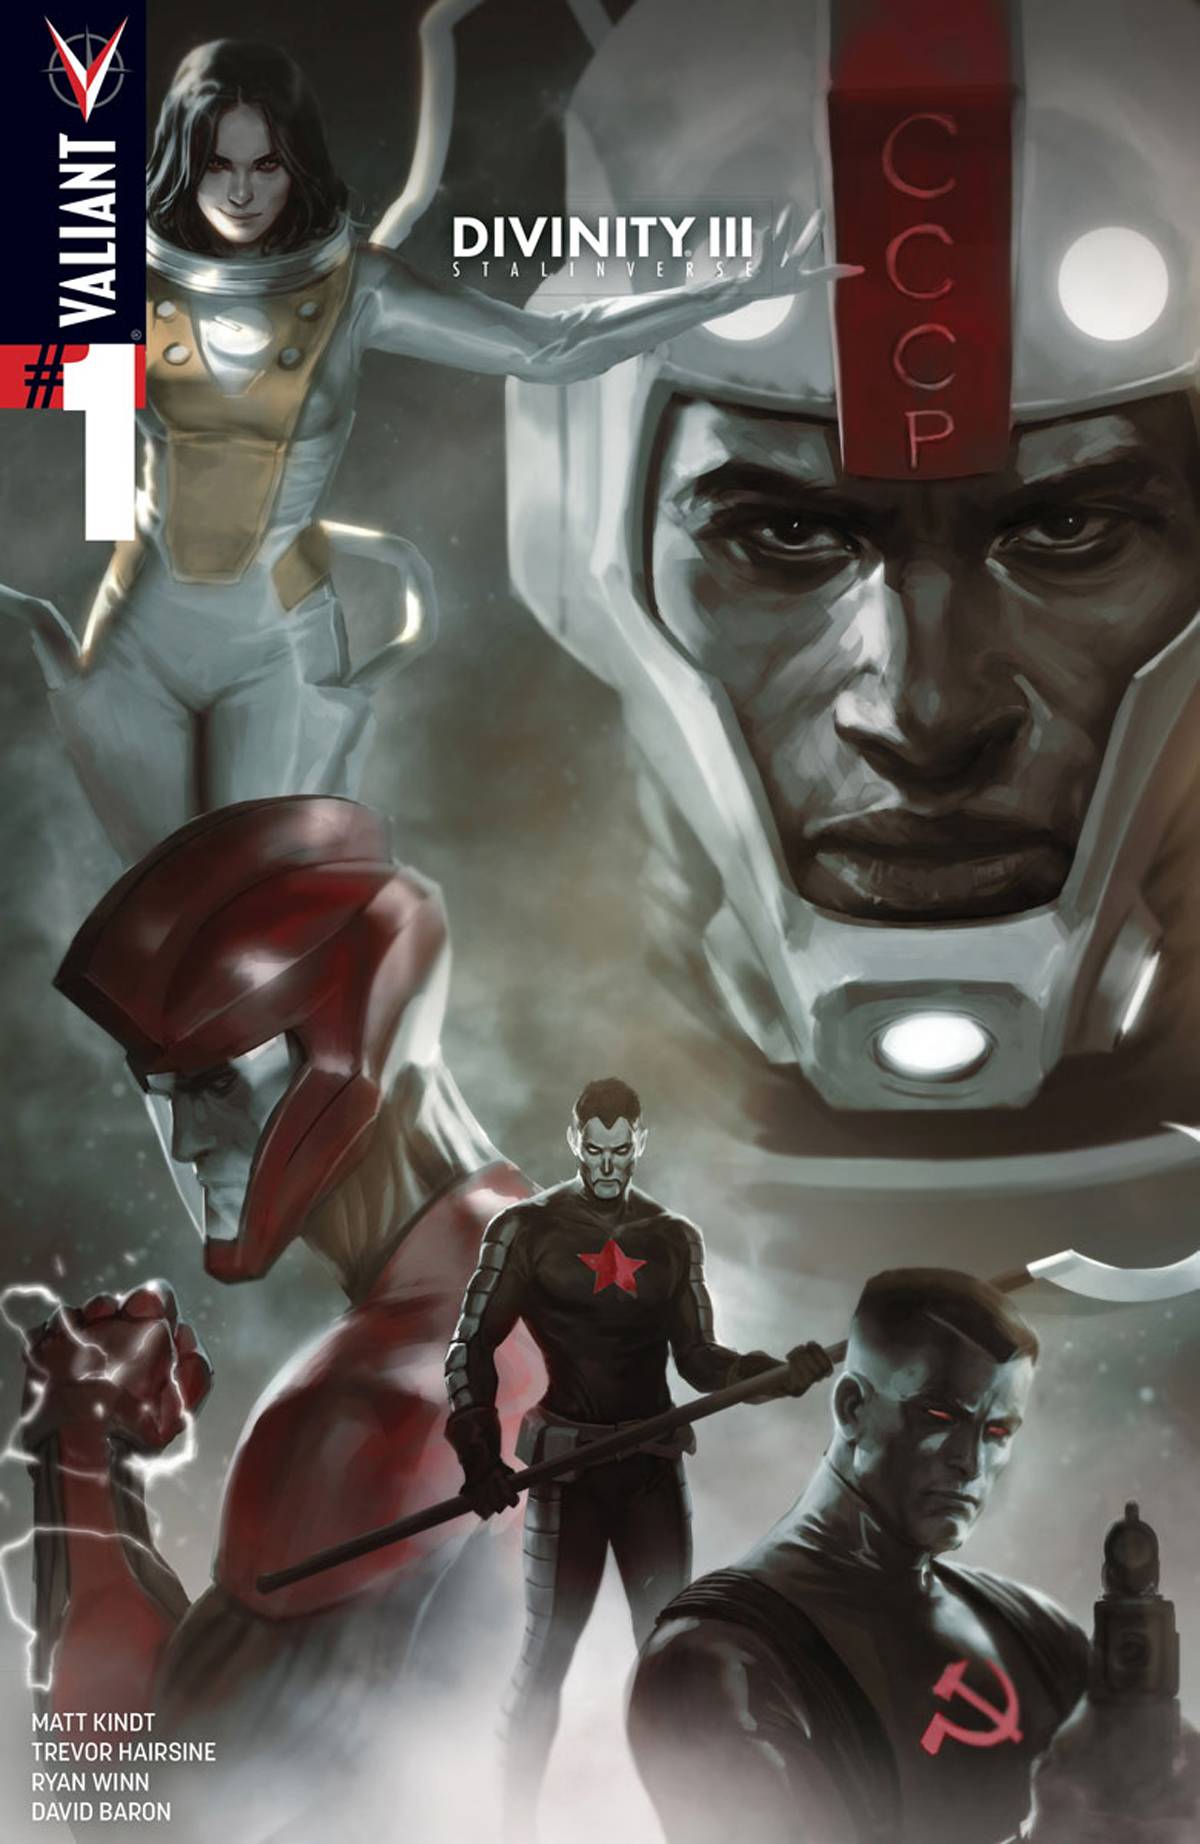 Divinity III Stalinverse #1 Cover A Djurdjevic